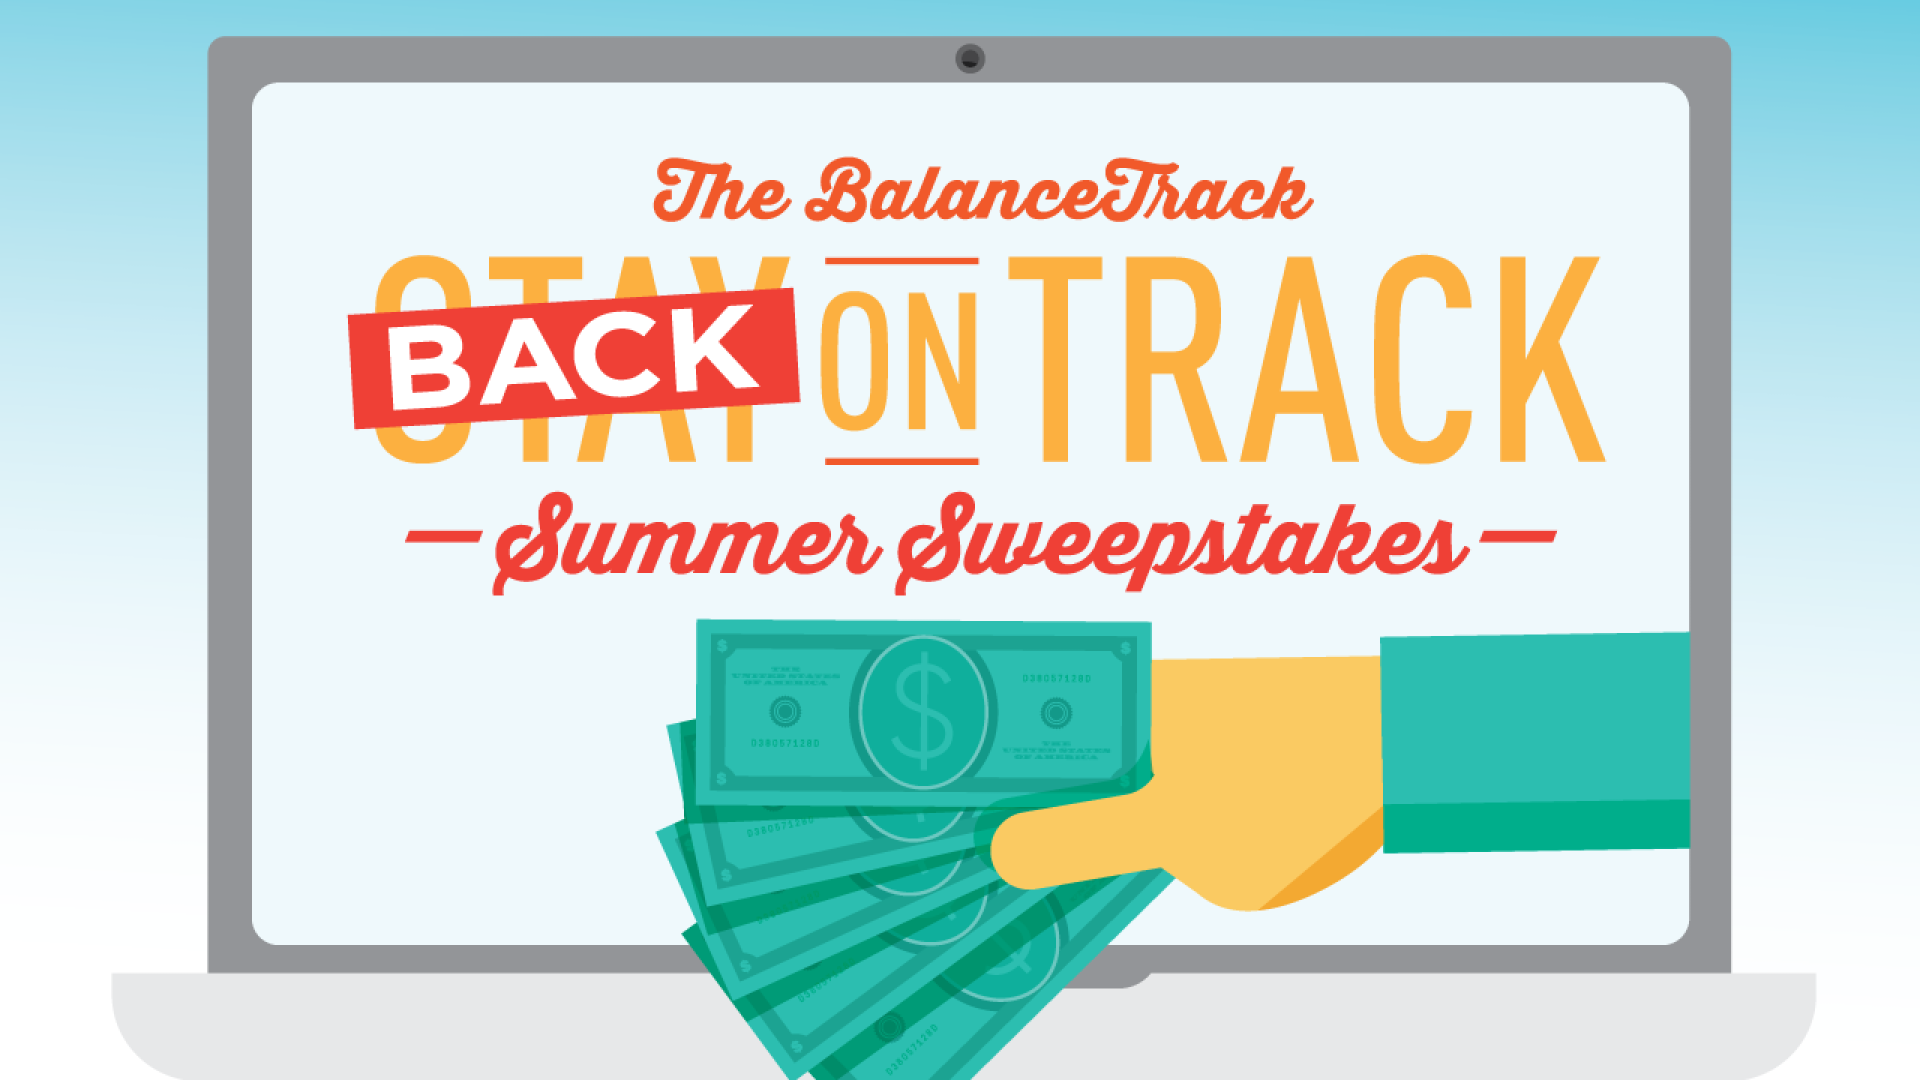 The Balance Track: Back on Track Summer Sweepstakes